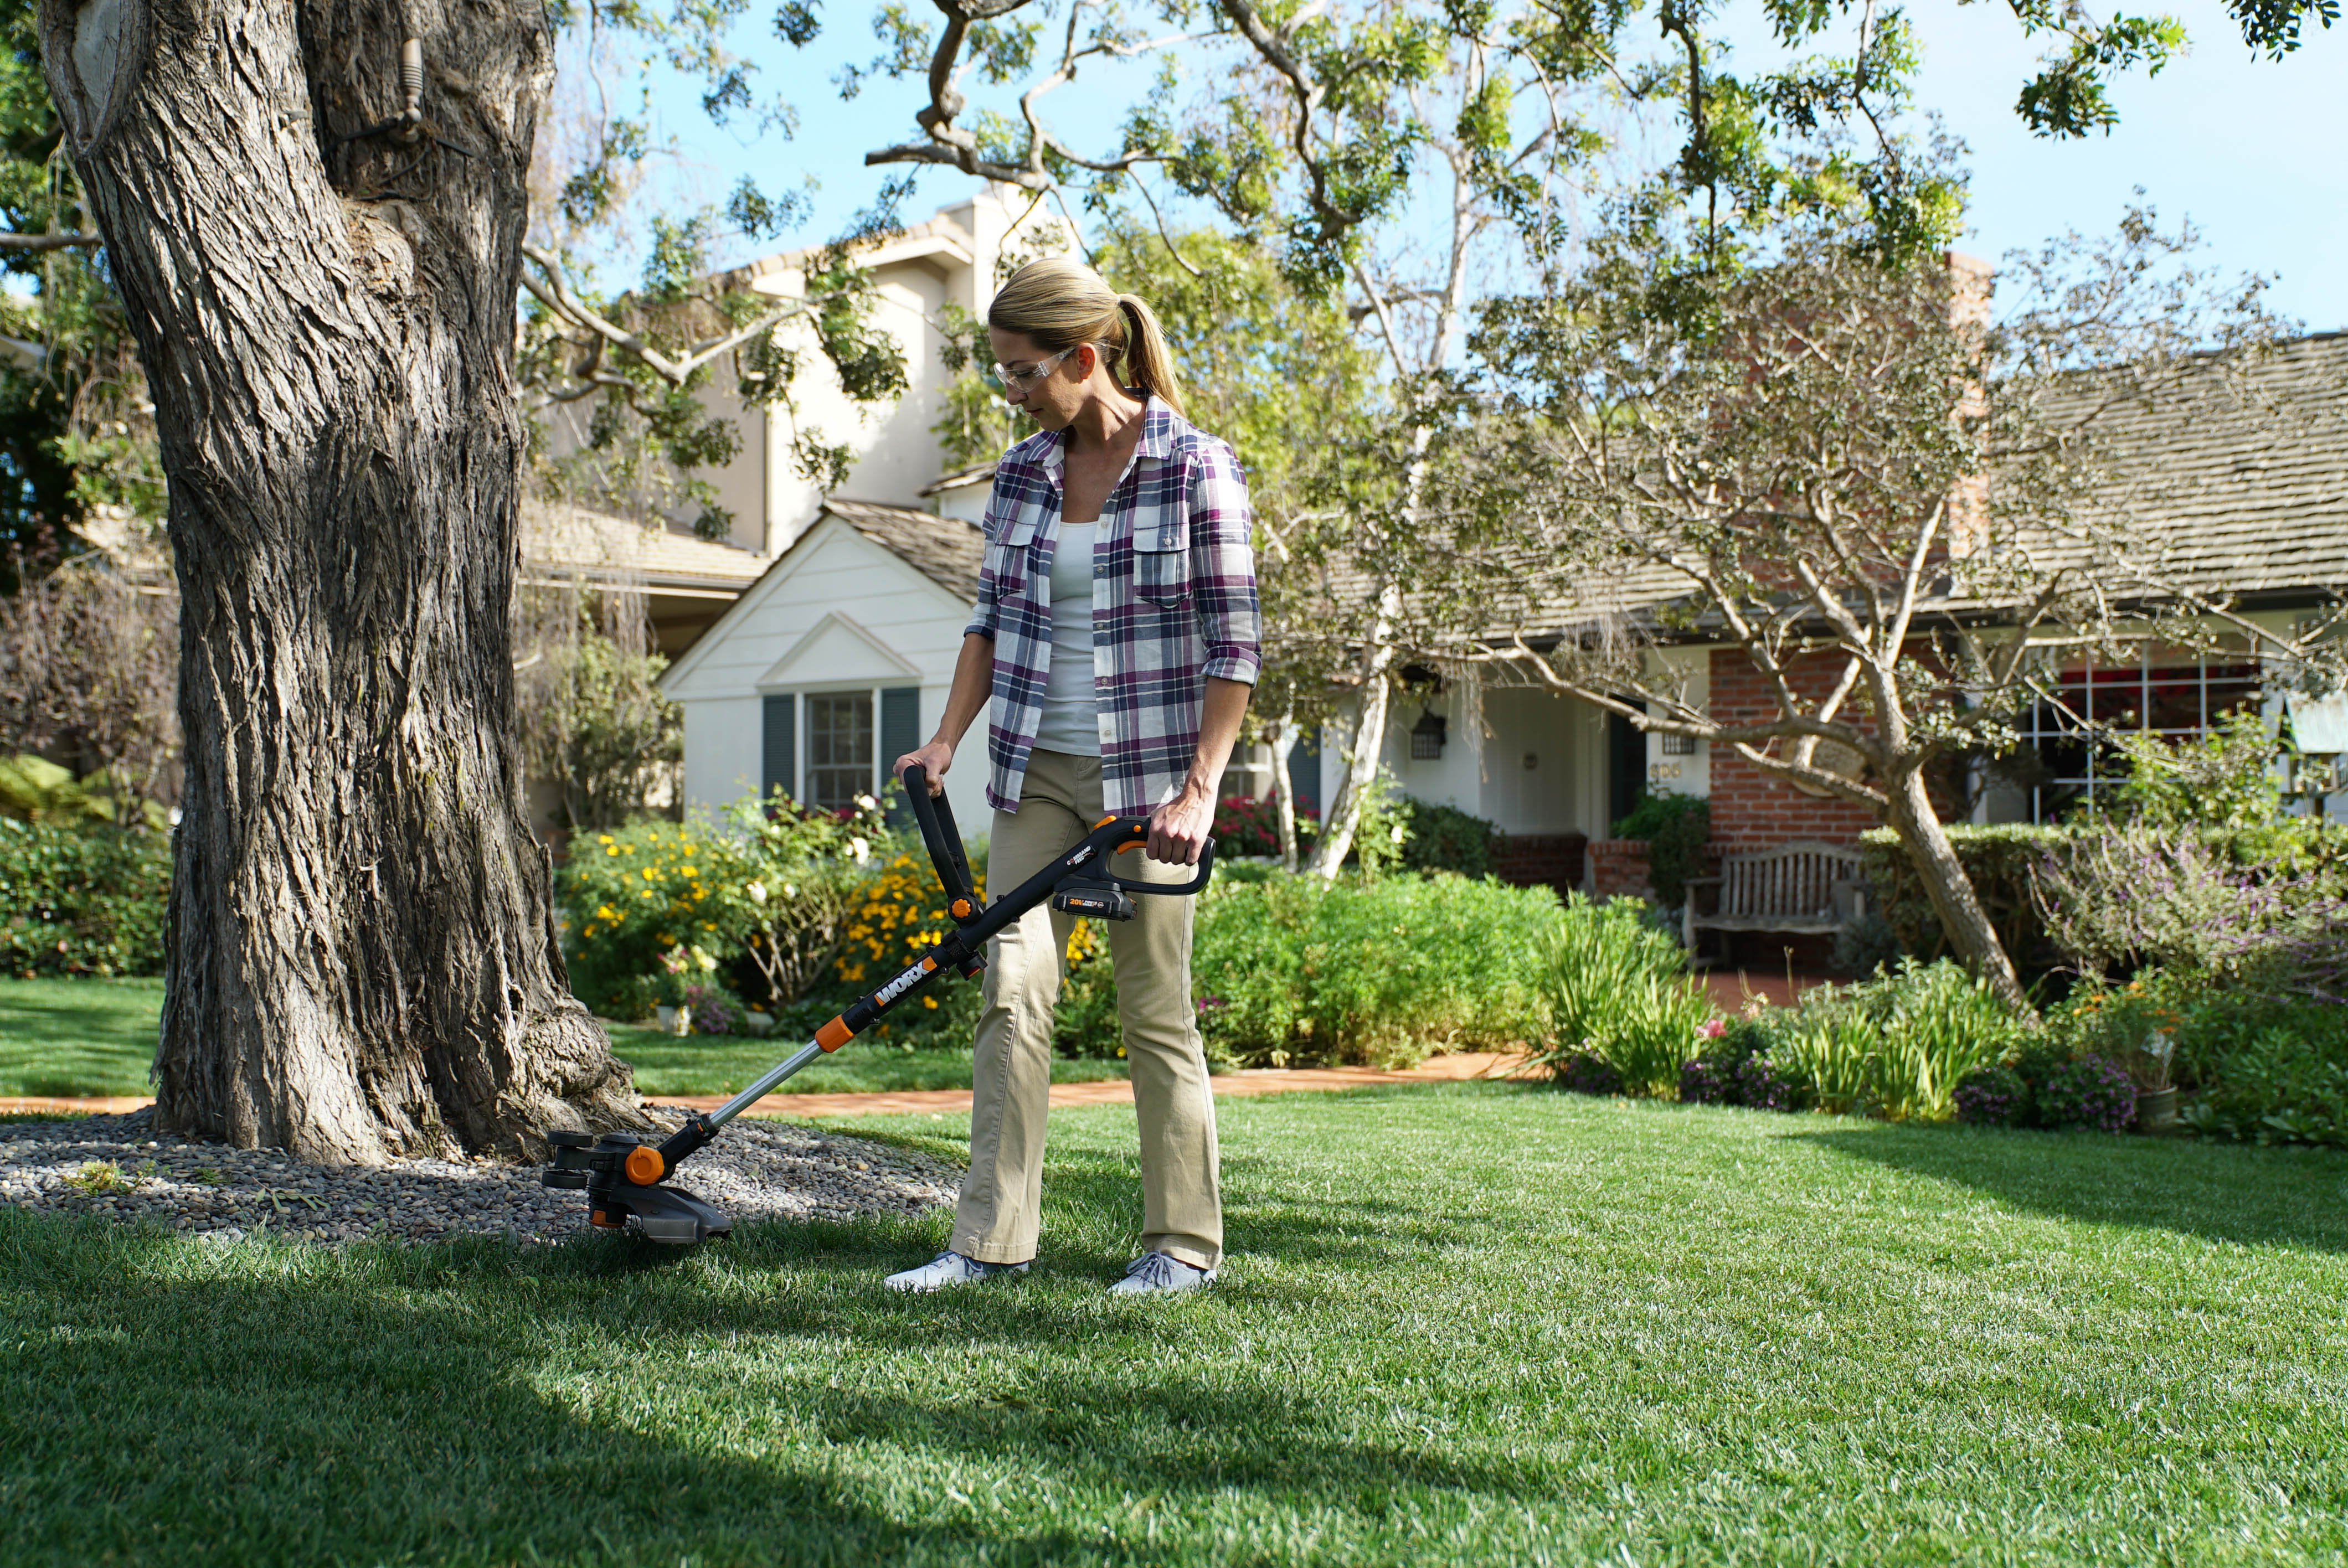 Your Ultimate Guide to Master a Grass Trimmer This Spring